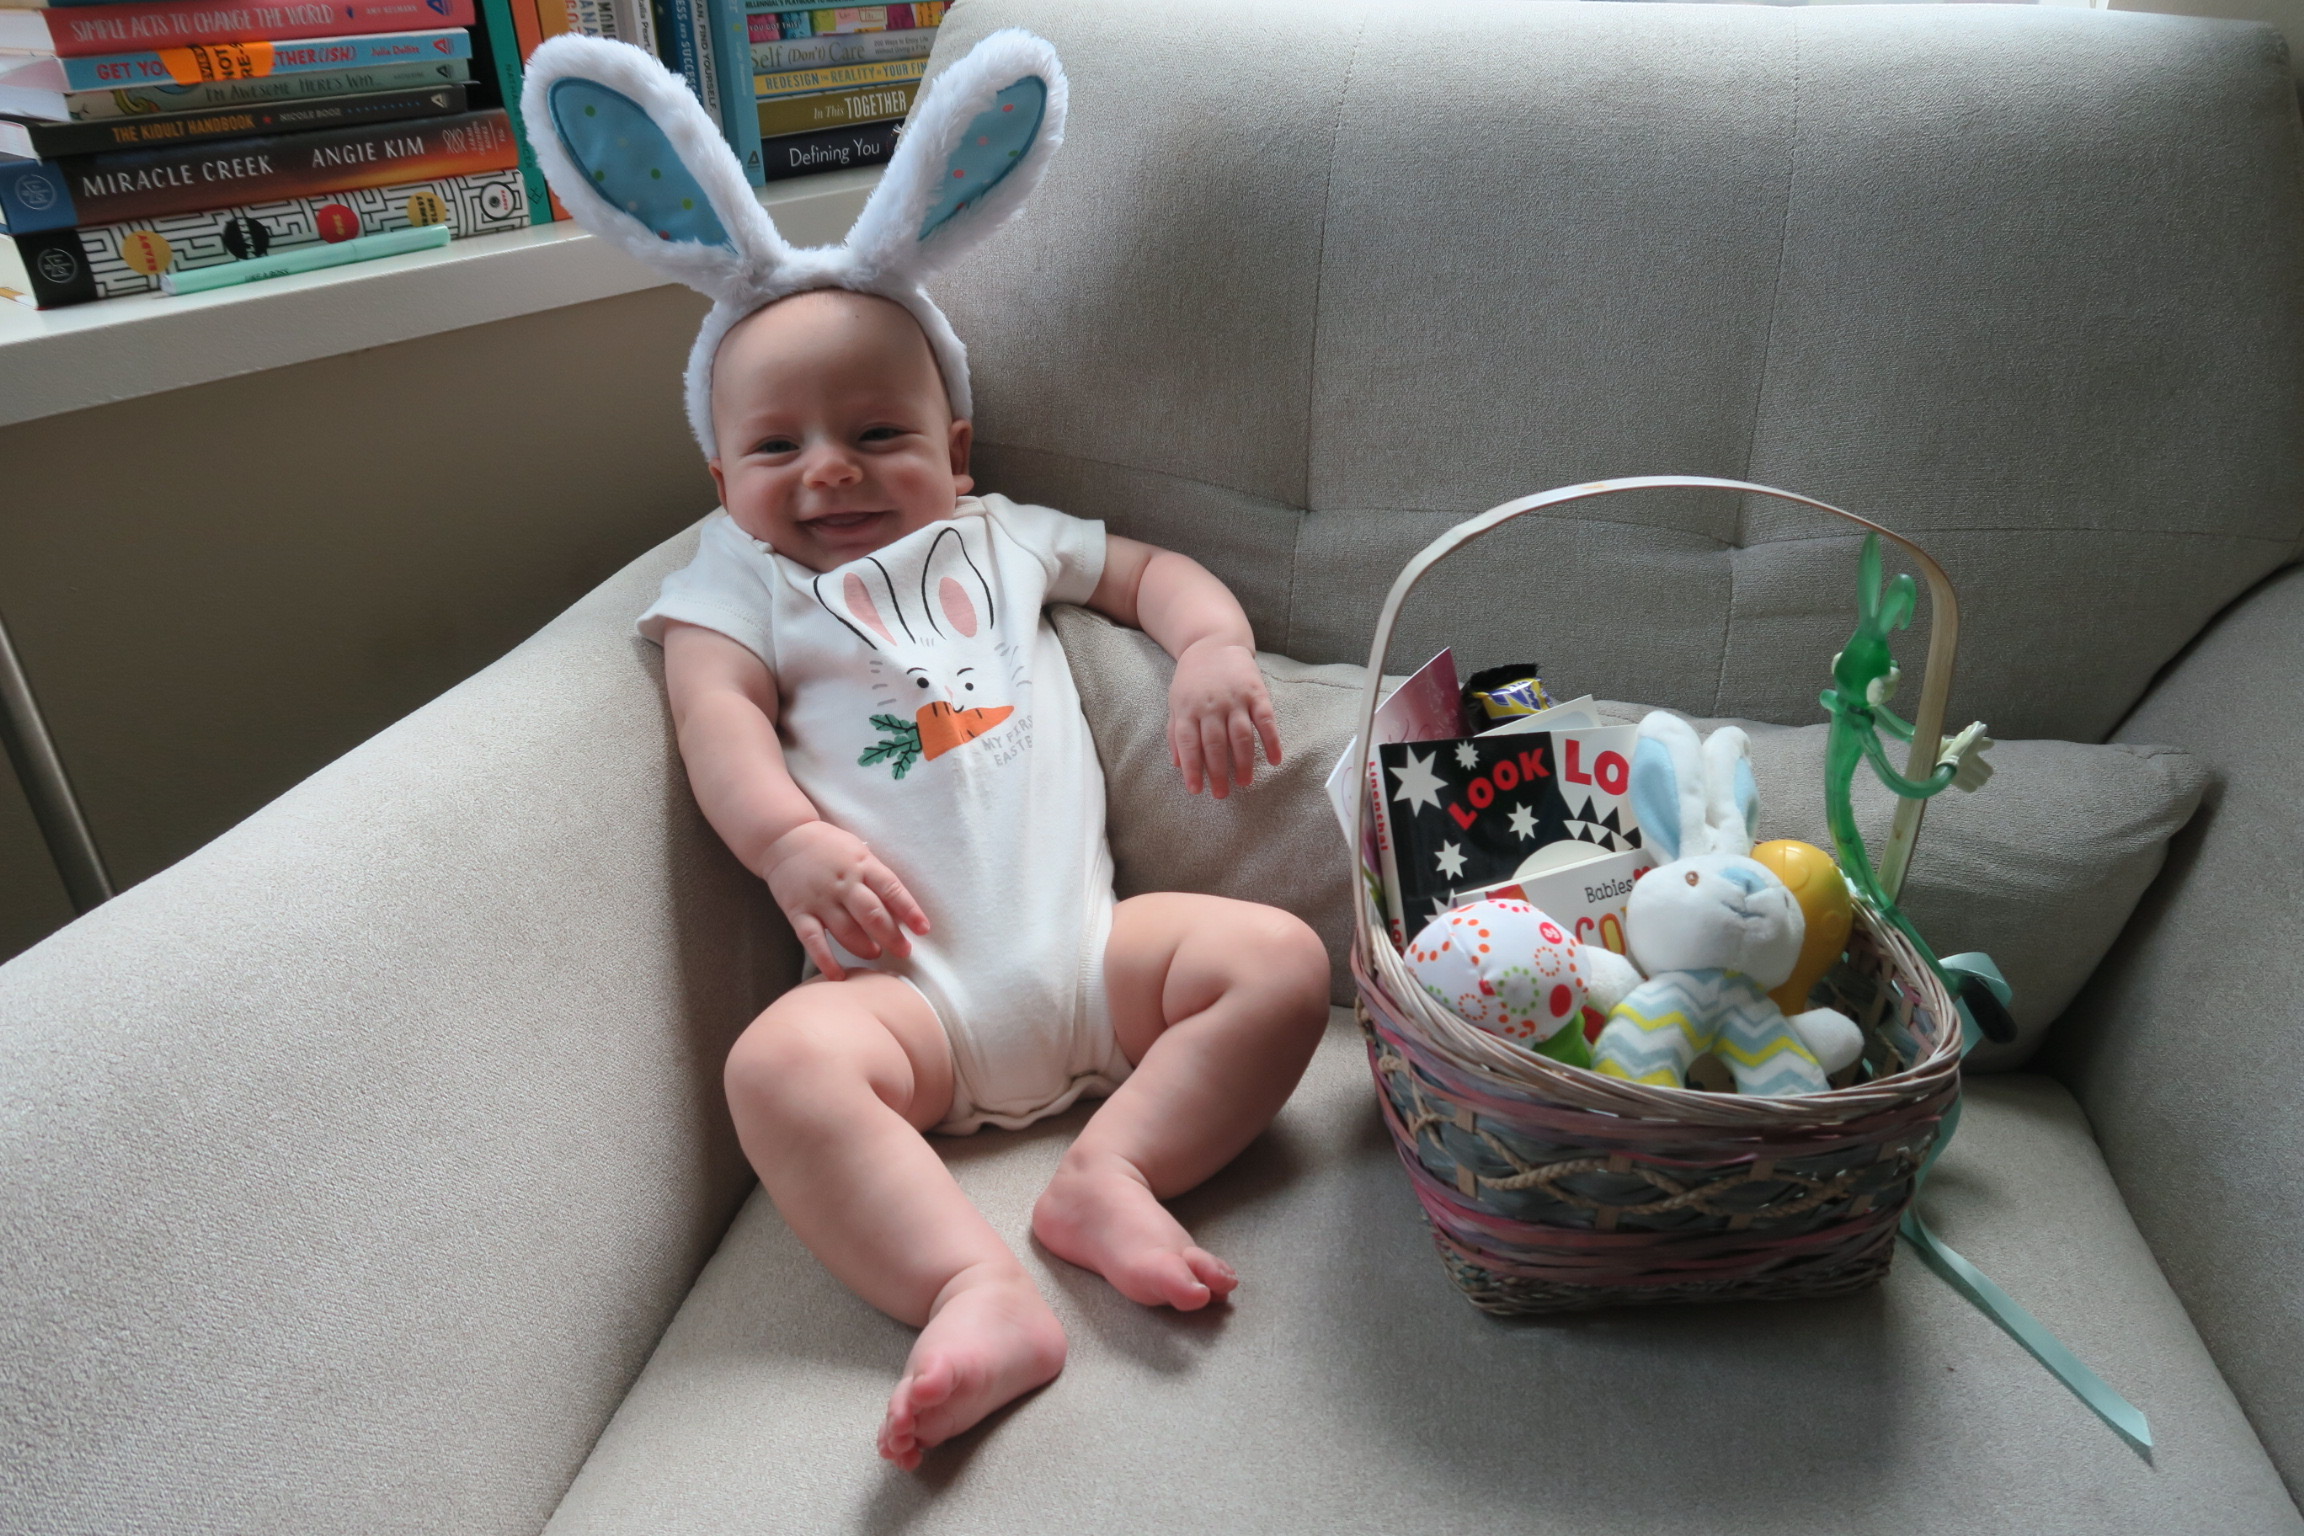 toddler easter basket ideas photo of a baby wearing bunny ears next to an easter basket - copyright nicole booz / genthirty.com / gentwenty, llc